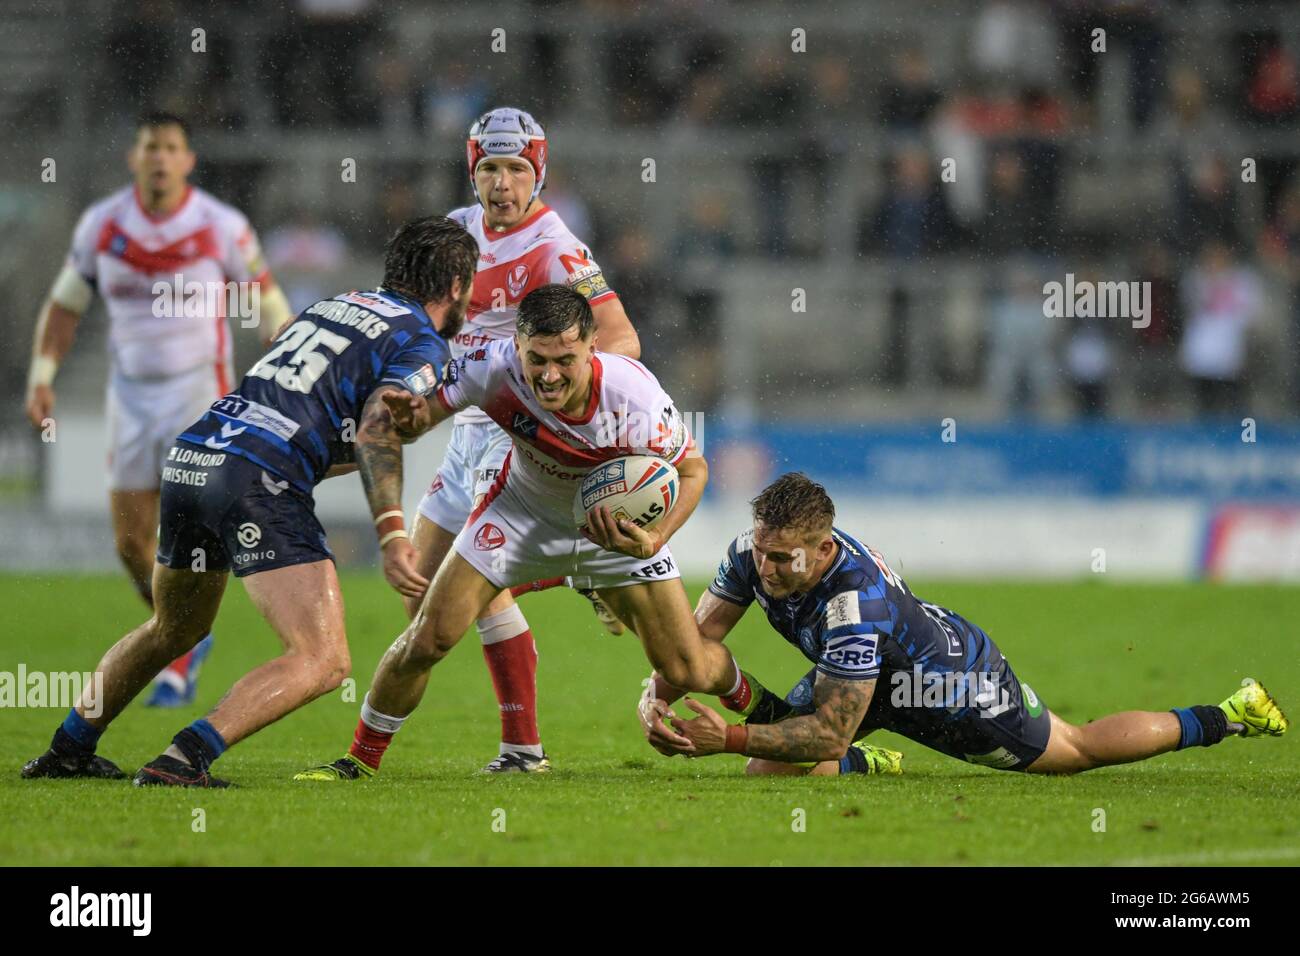 Lewis Dodd (21) of St Helens is tackled by Sam Powell (9) of Wigan Warriors and Joe Shorrocks (25) of Wigan Warriors  in St Helens, United Kingdom on 7/4/2021. (Photo by Simon Whitehead/ SW Photo/News Images/Sipa USA) Stock Photo